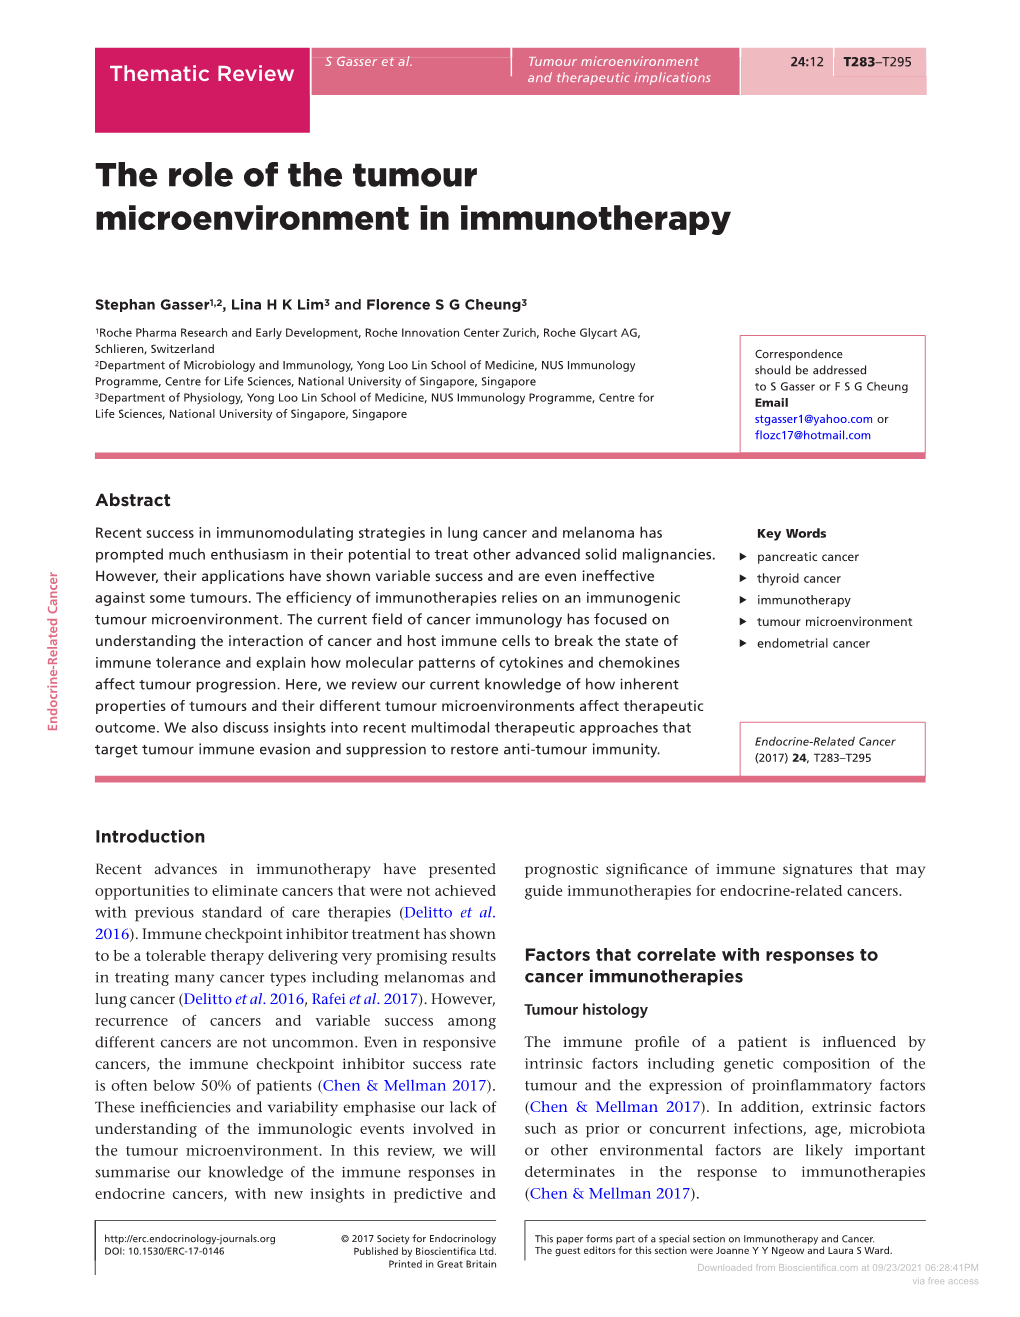 The Role of the Tumour Microenvironment in Immunotherapy